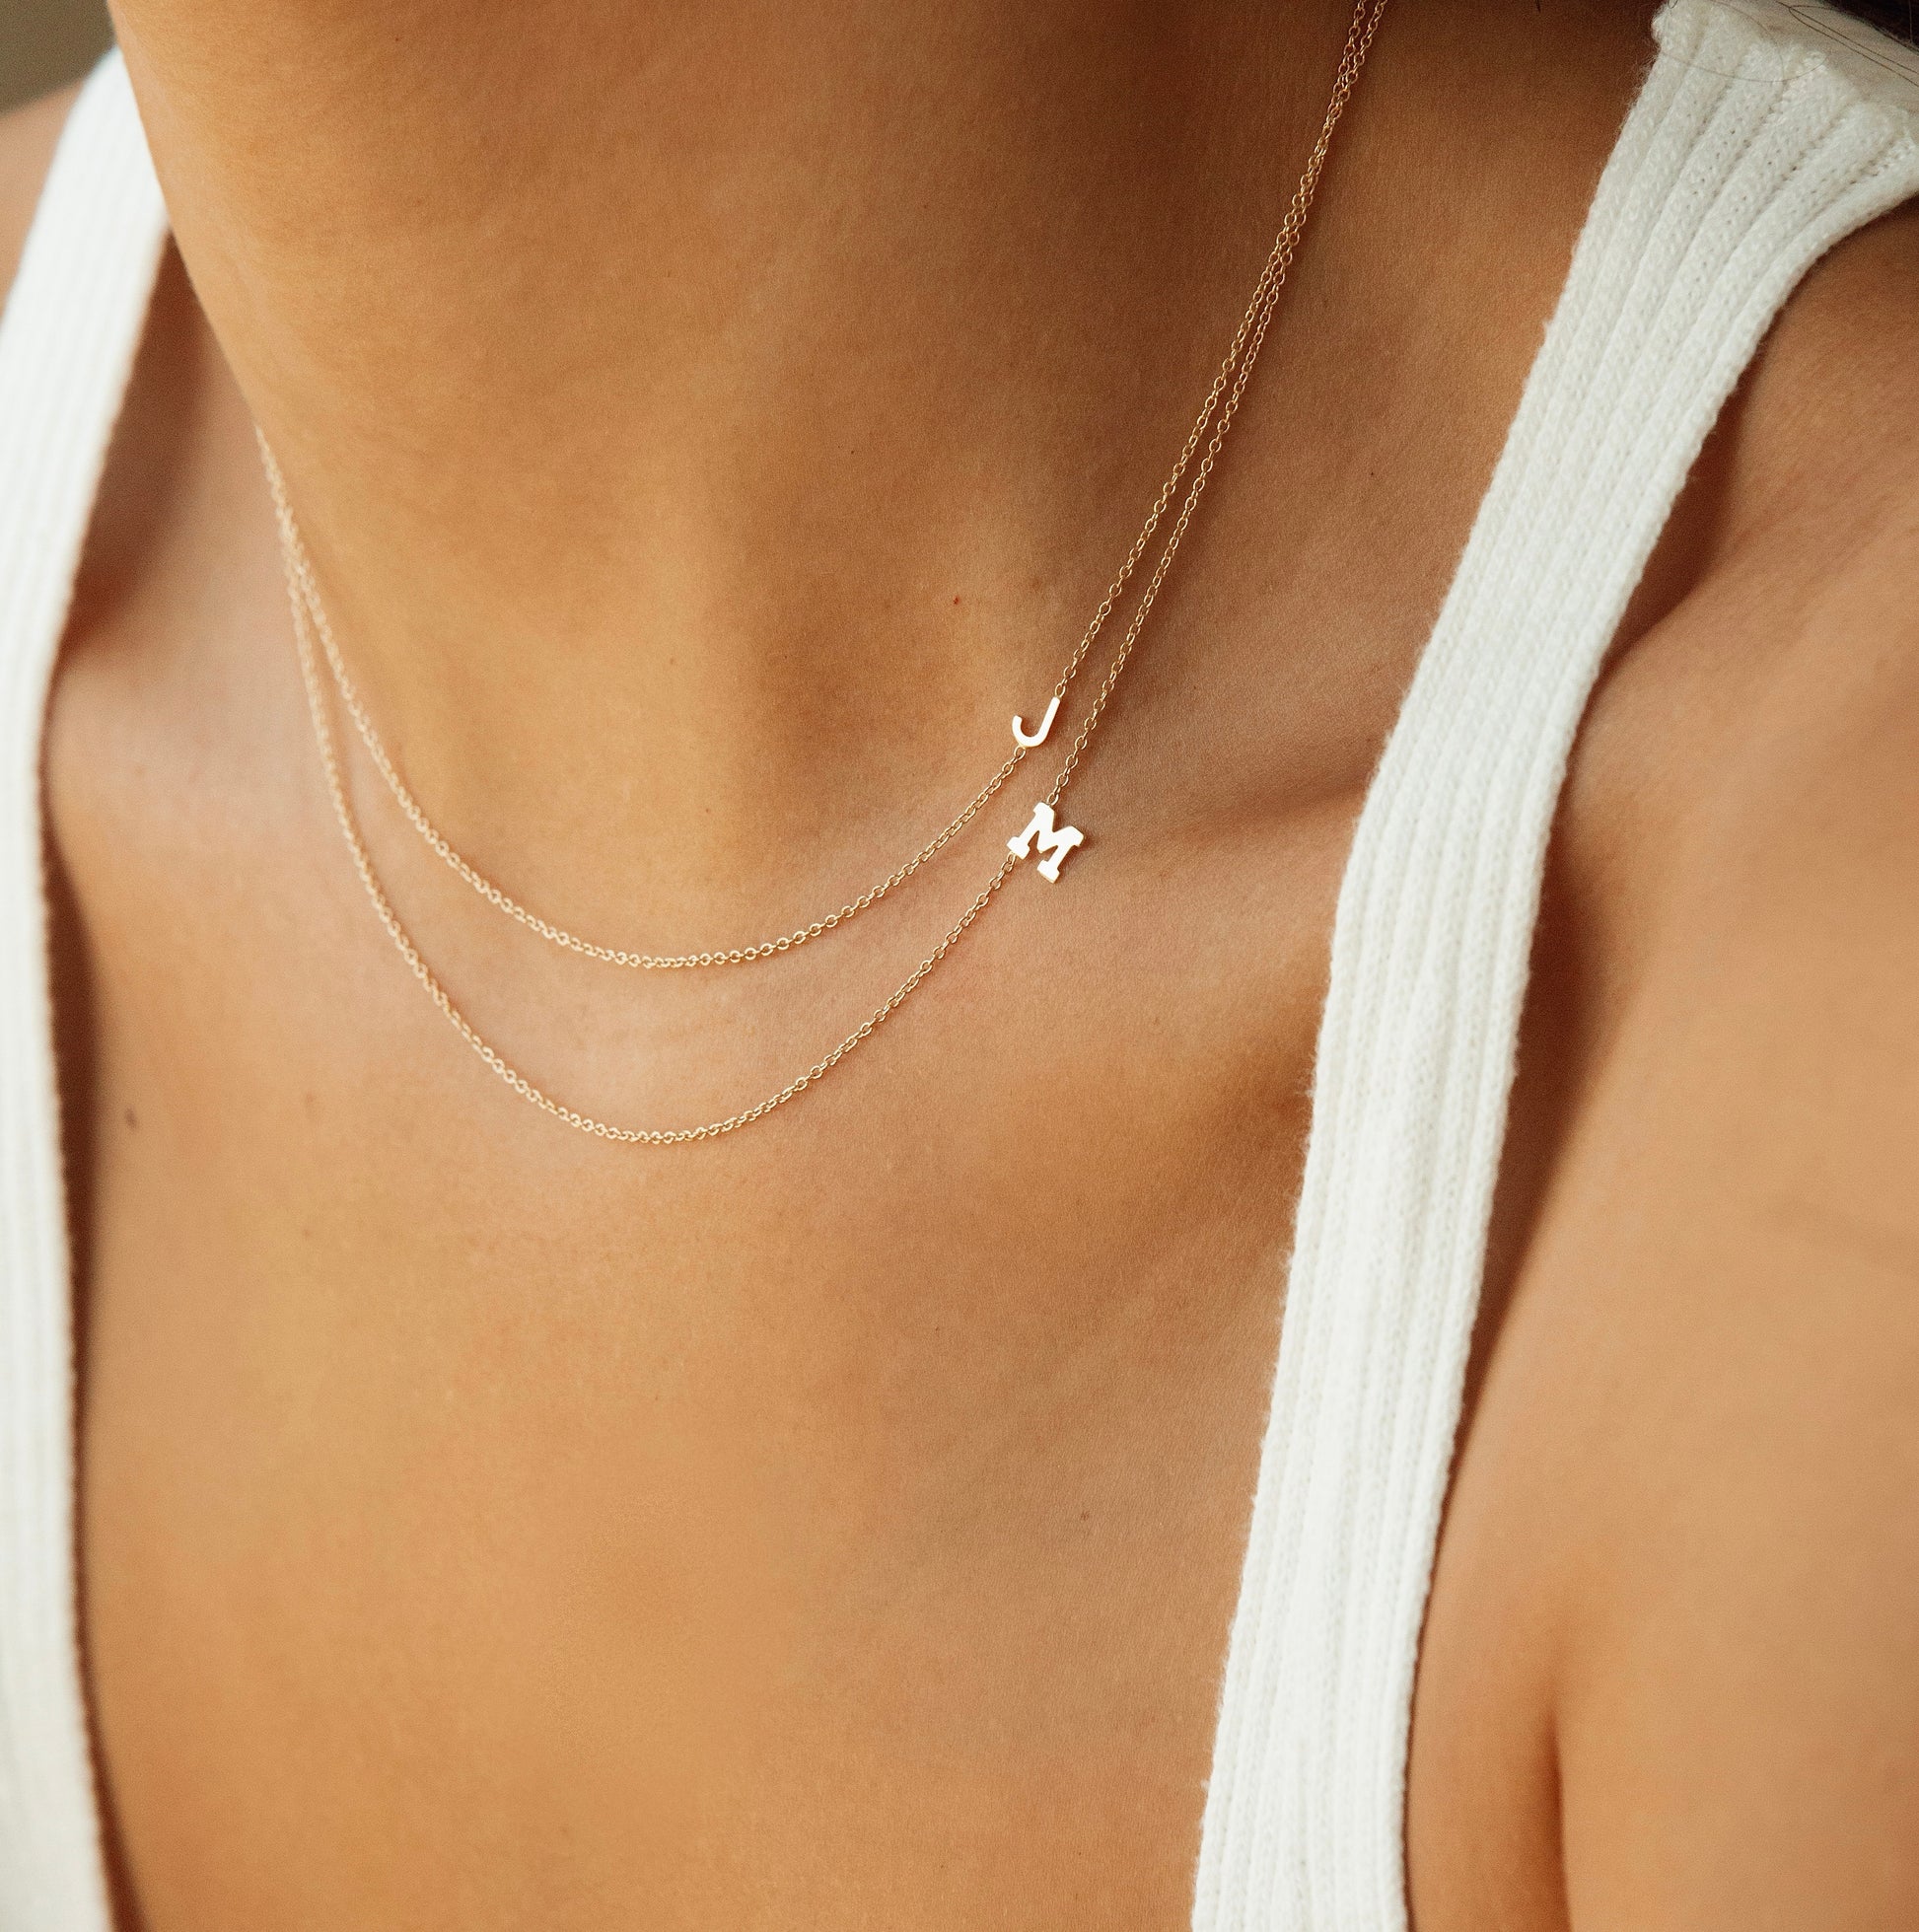 Delicate Cross Necklace and Initial Pendant U